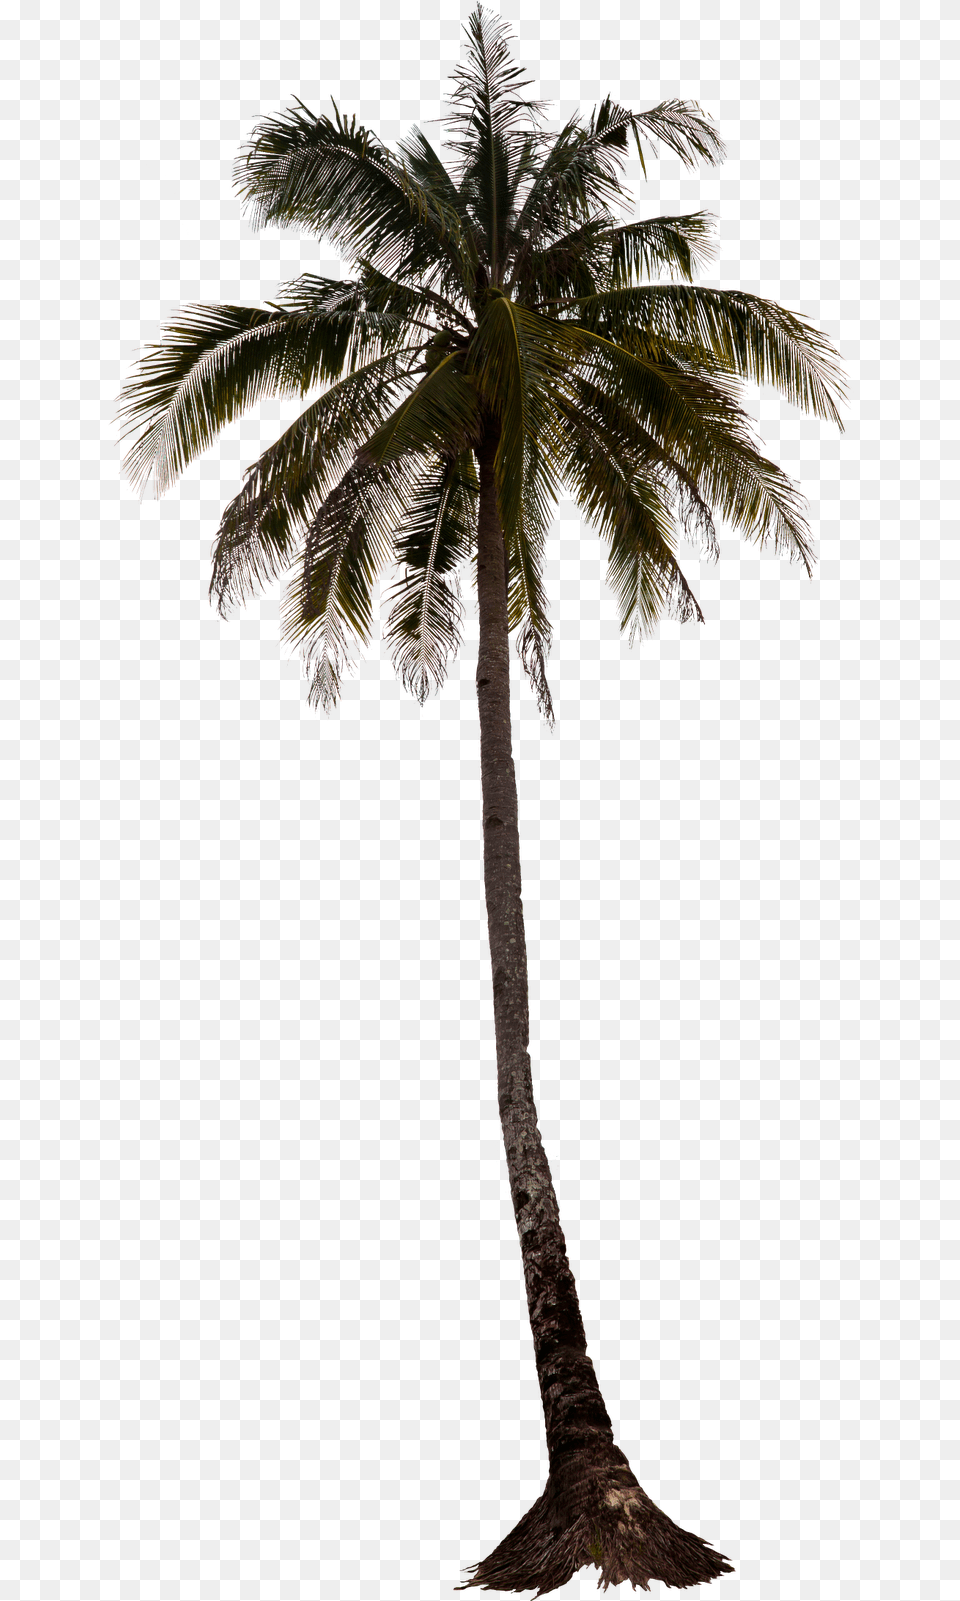 Palm Tree Palm Trees Tree Render Photoshop Palm Tree Photoshop Coconut, Palm Tree, Plant, Leaf, Outdoors Free Png